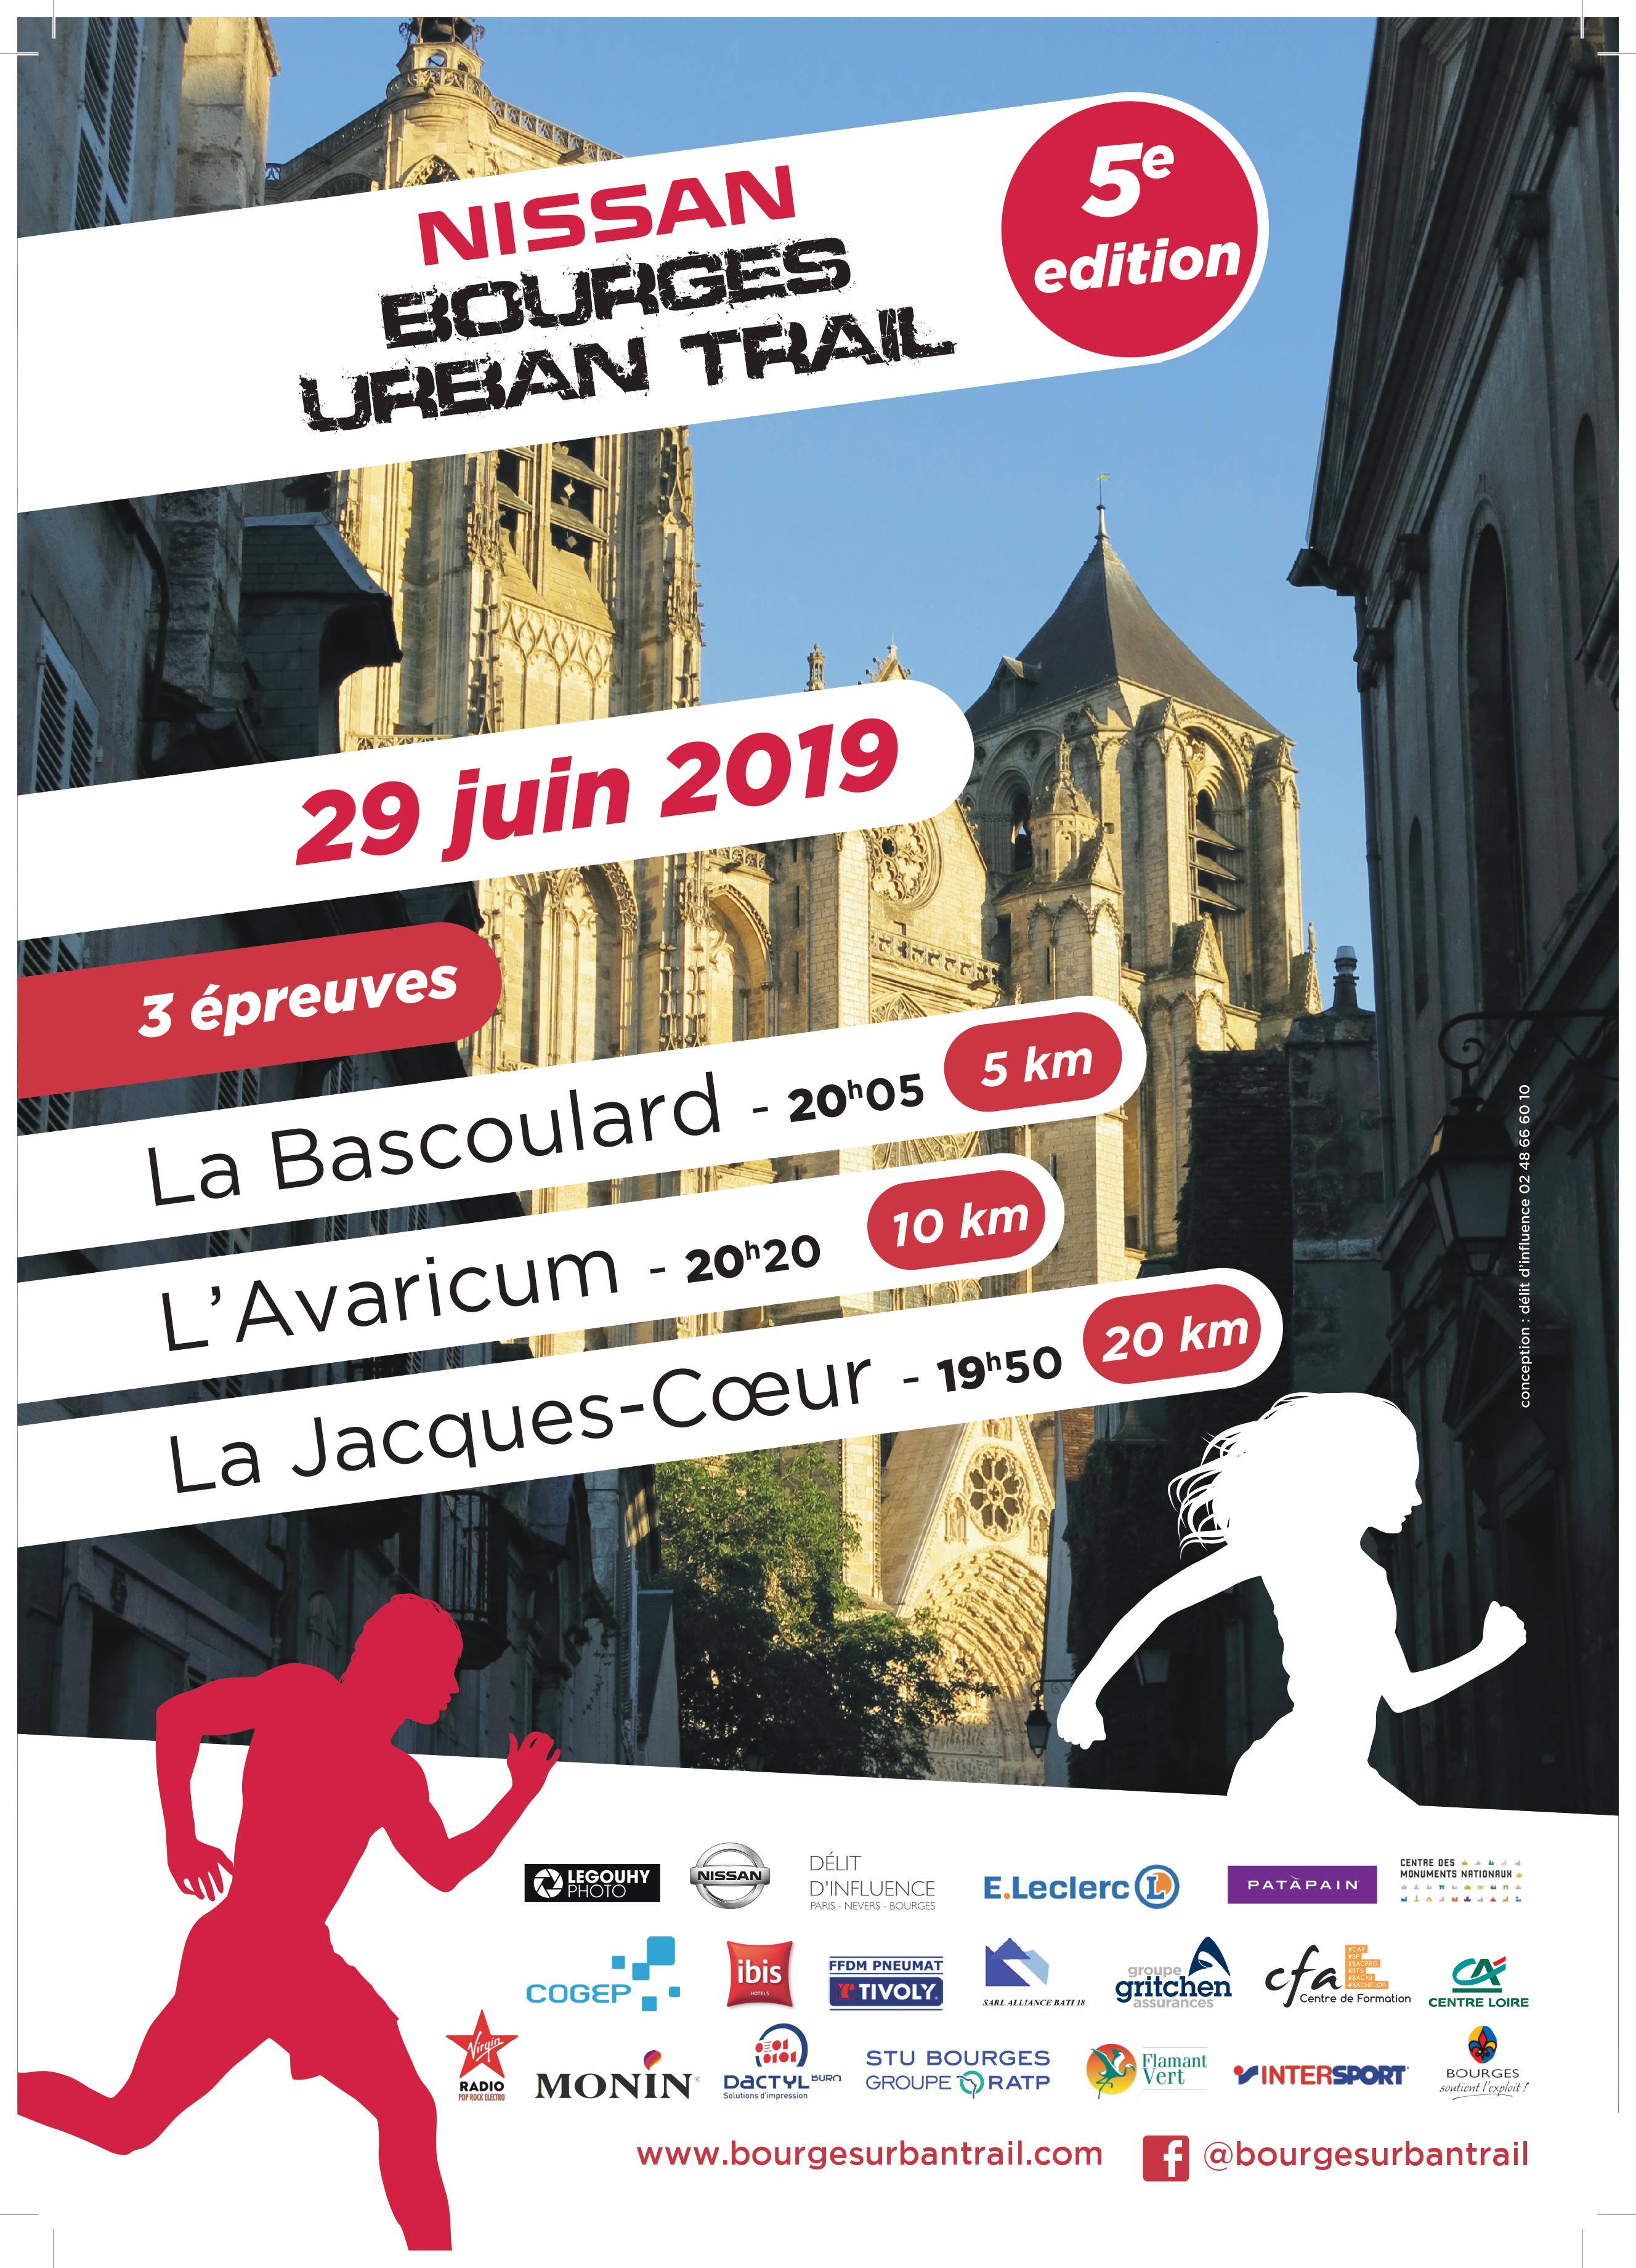 Bourges Urban Trail 2019